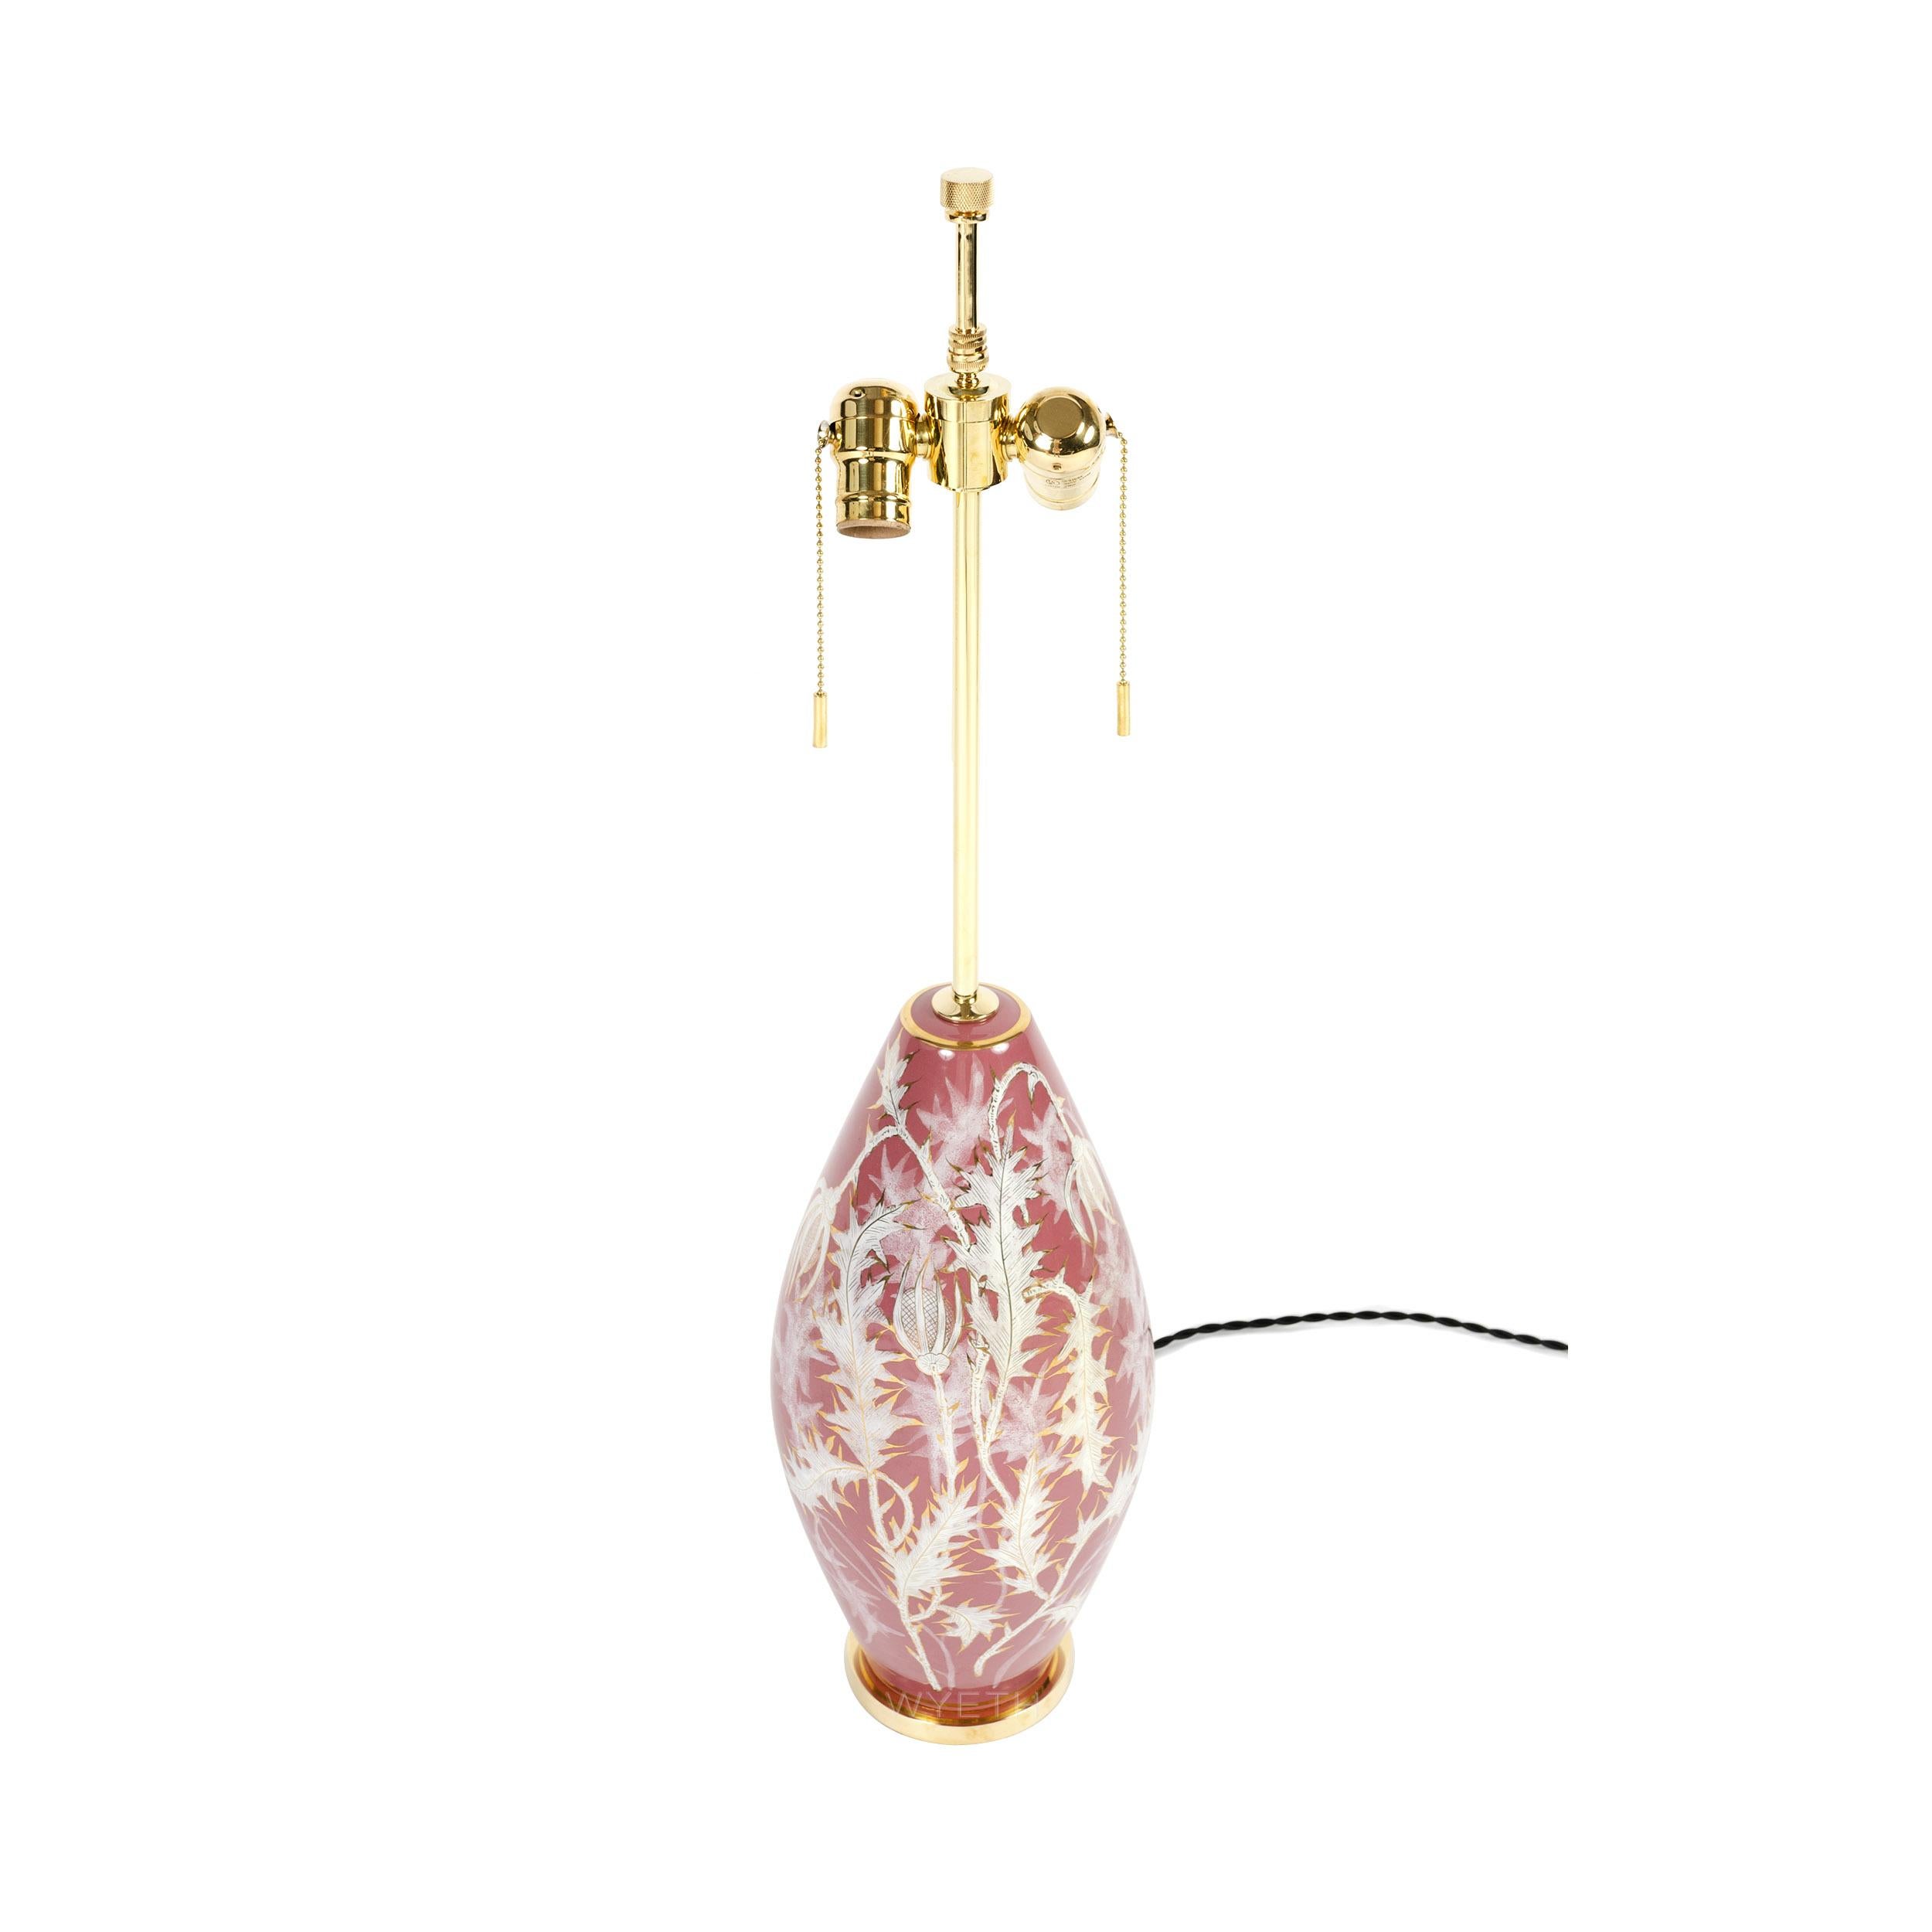 Ceramic table lamp with an ovoid shaped body, hand decorated with white thistle leaves and vine with gold accents on a light, coral colored background.